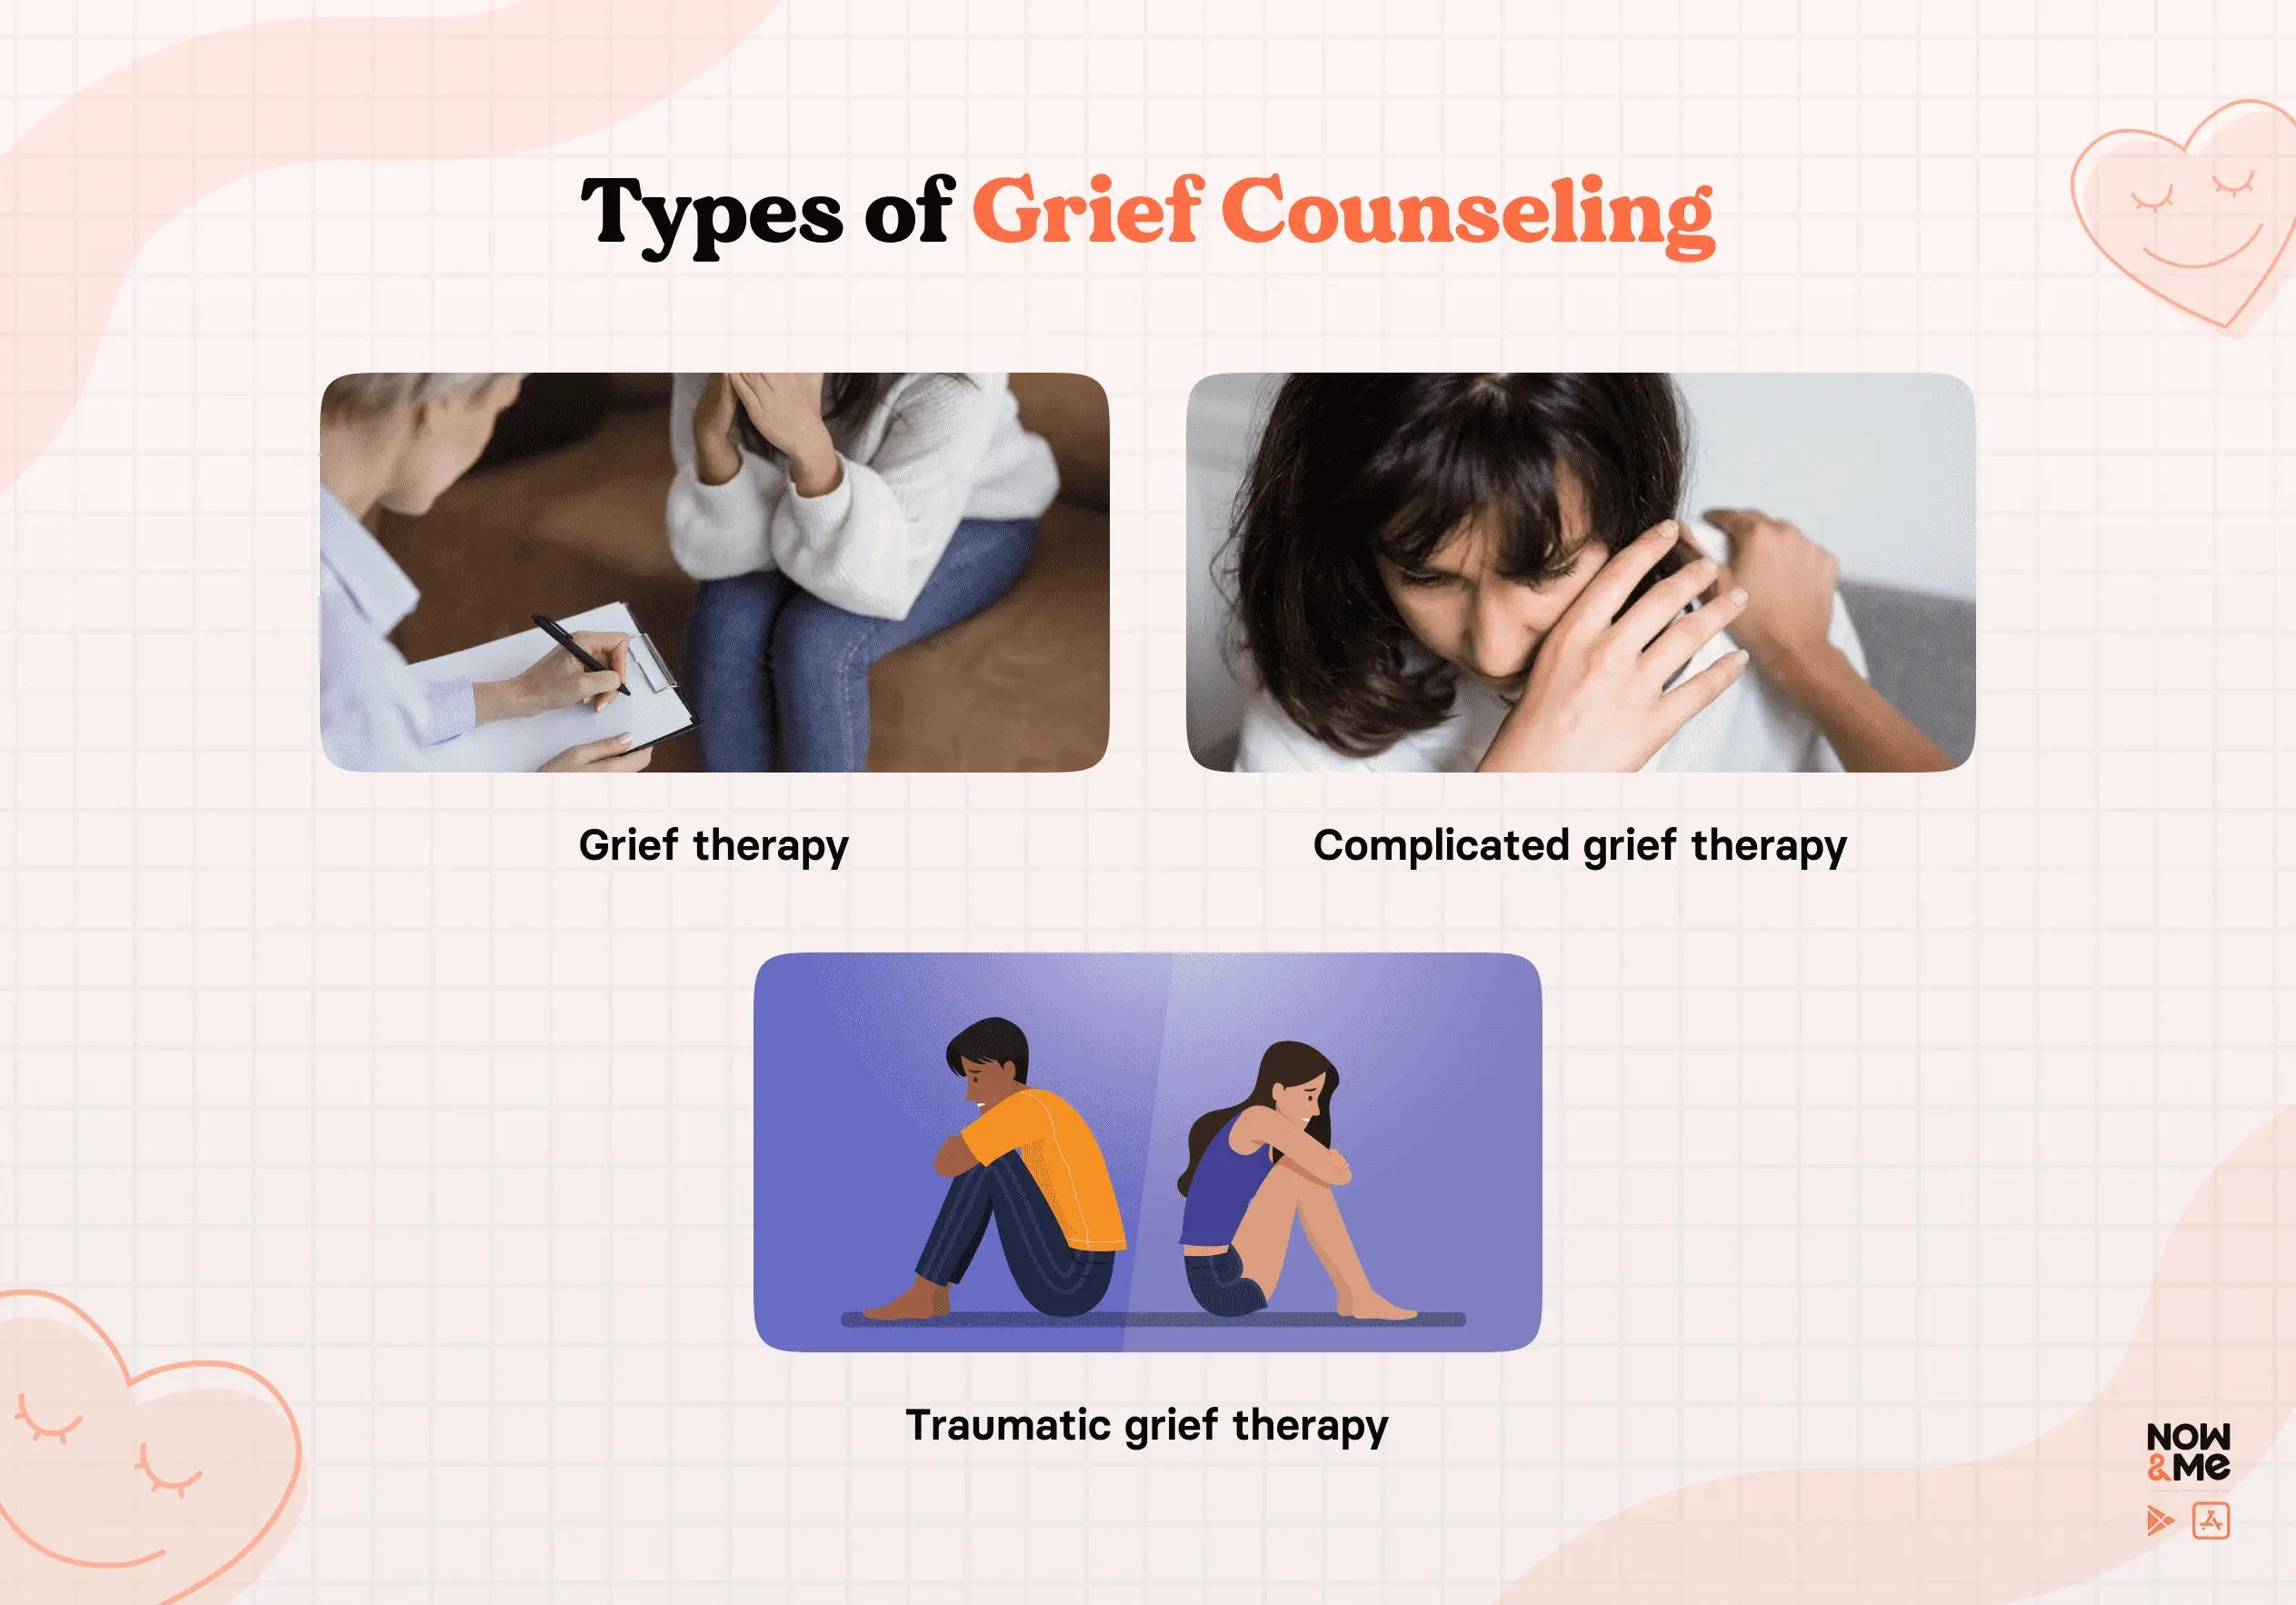 Types of Grief Counseling